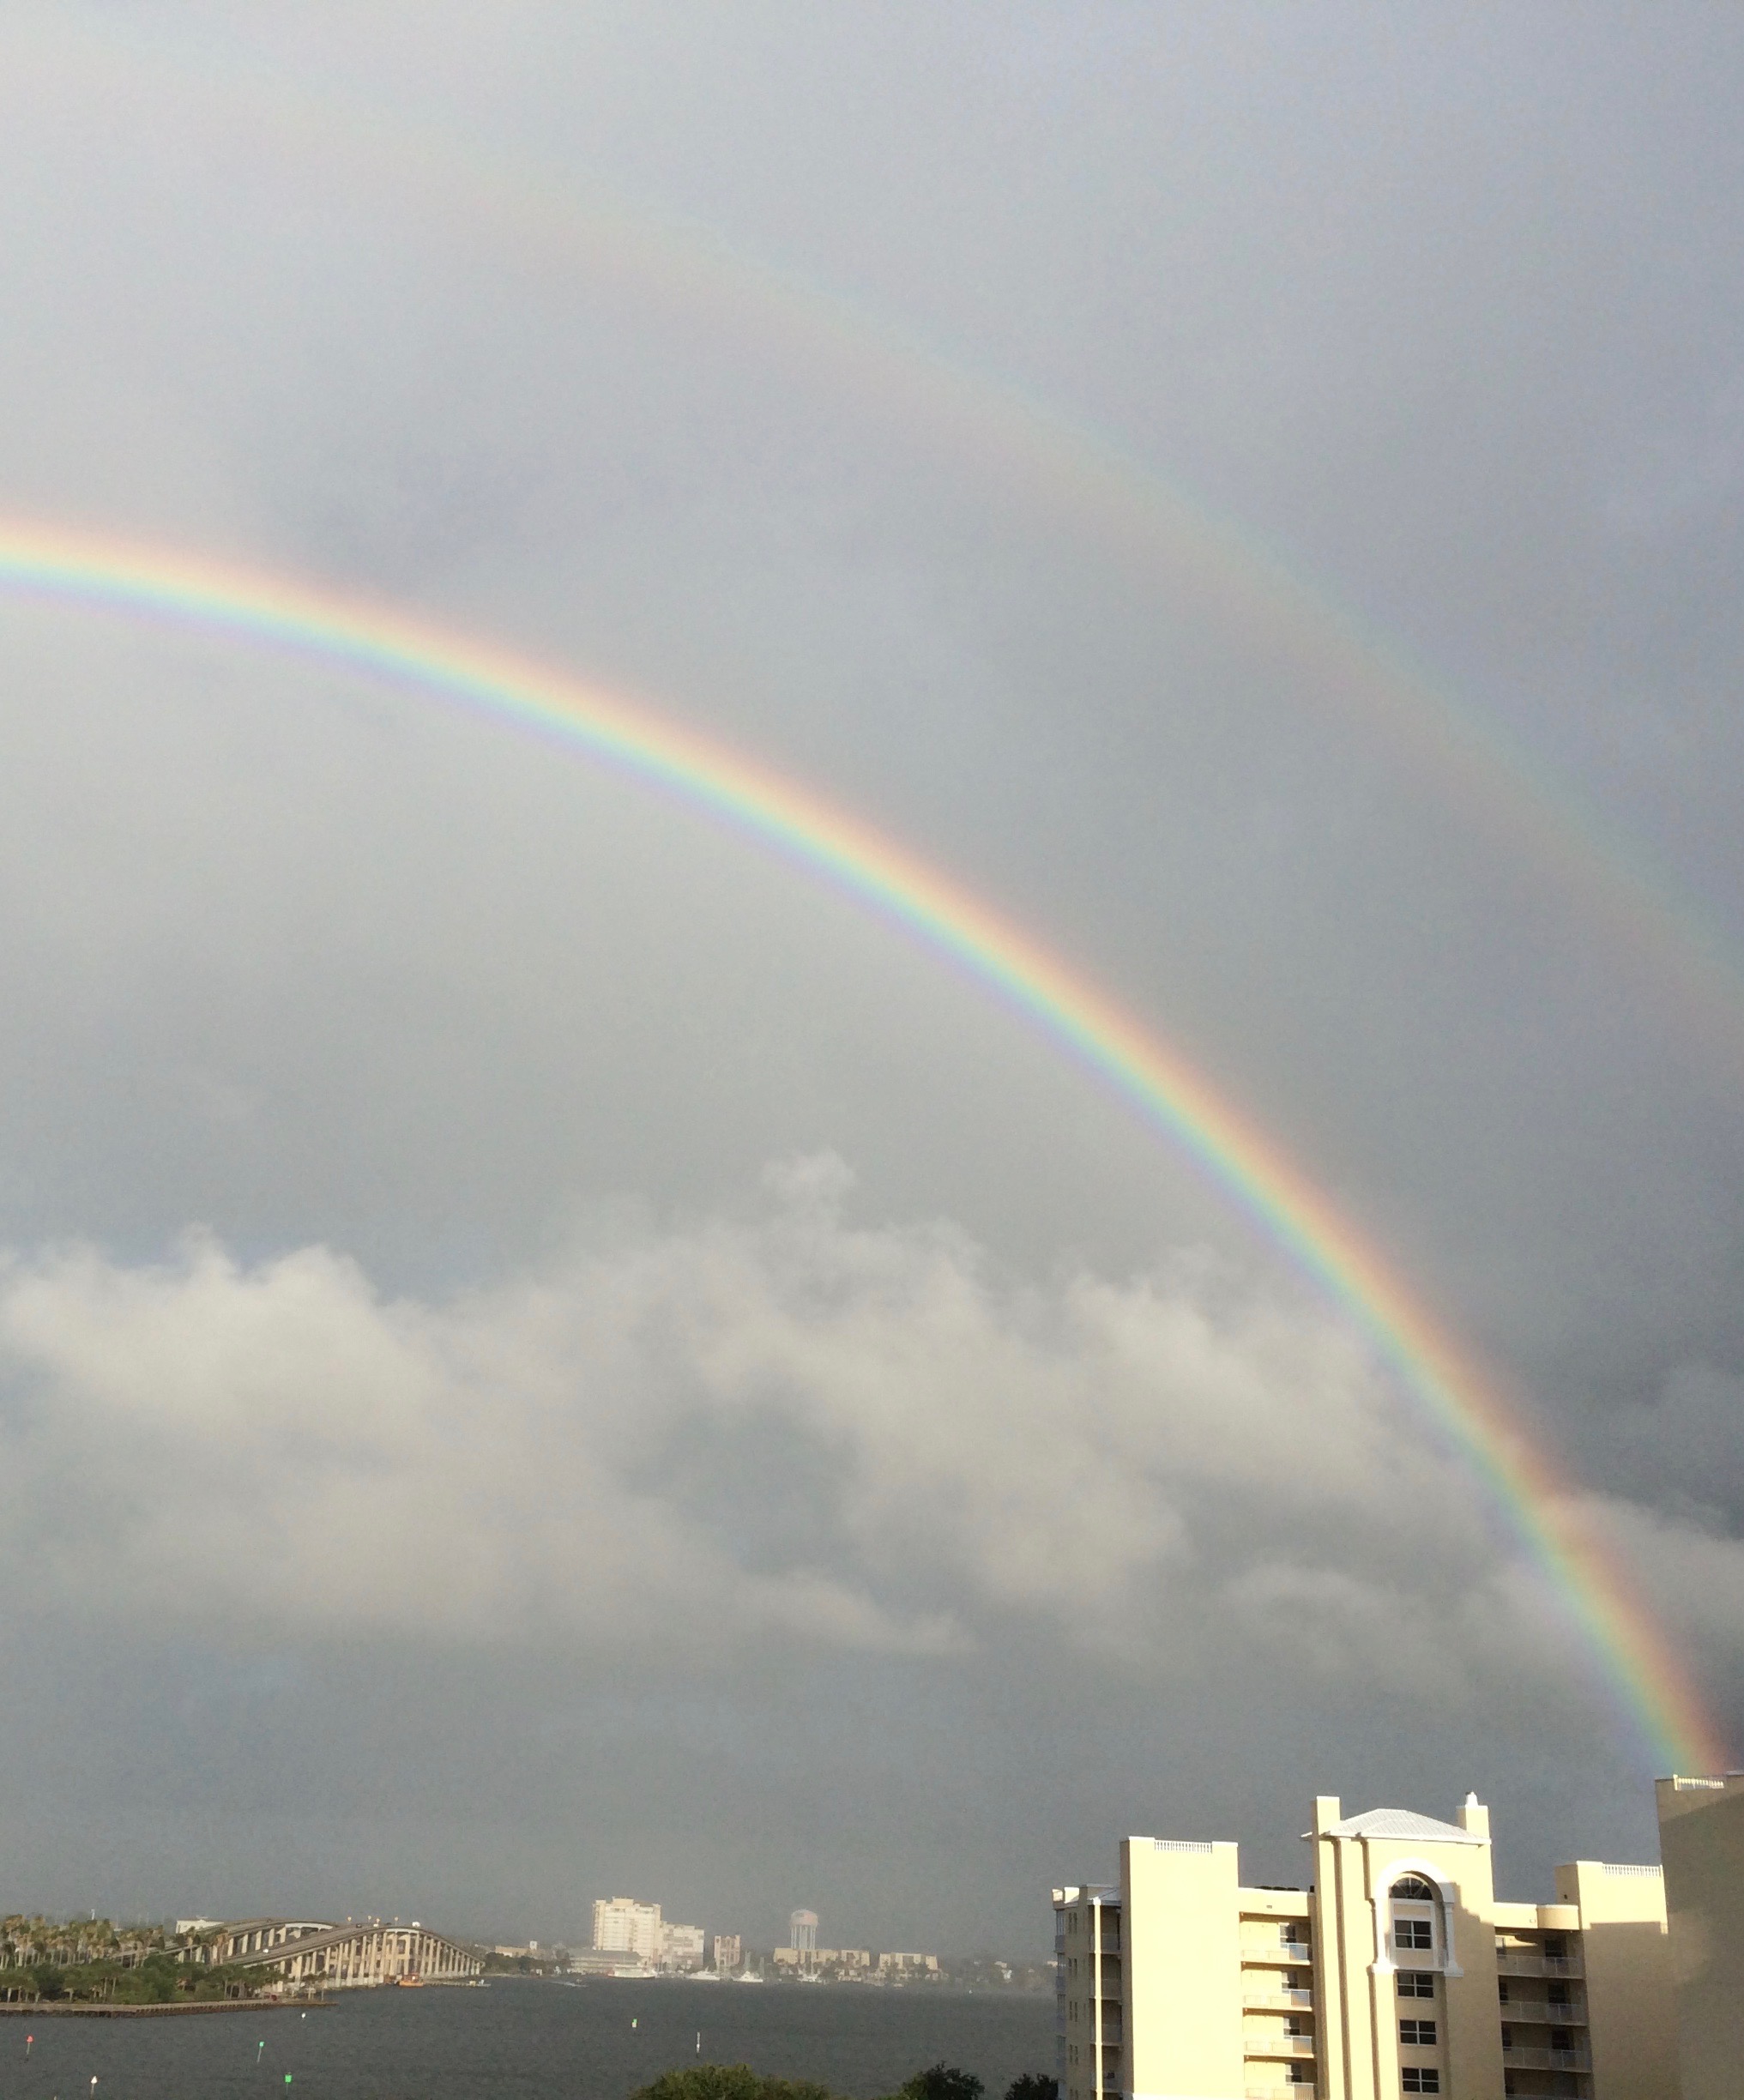 Rainbow over the River taken by 134 resident DK (iPhone 5s)